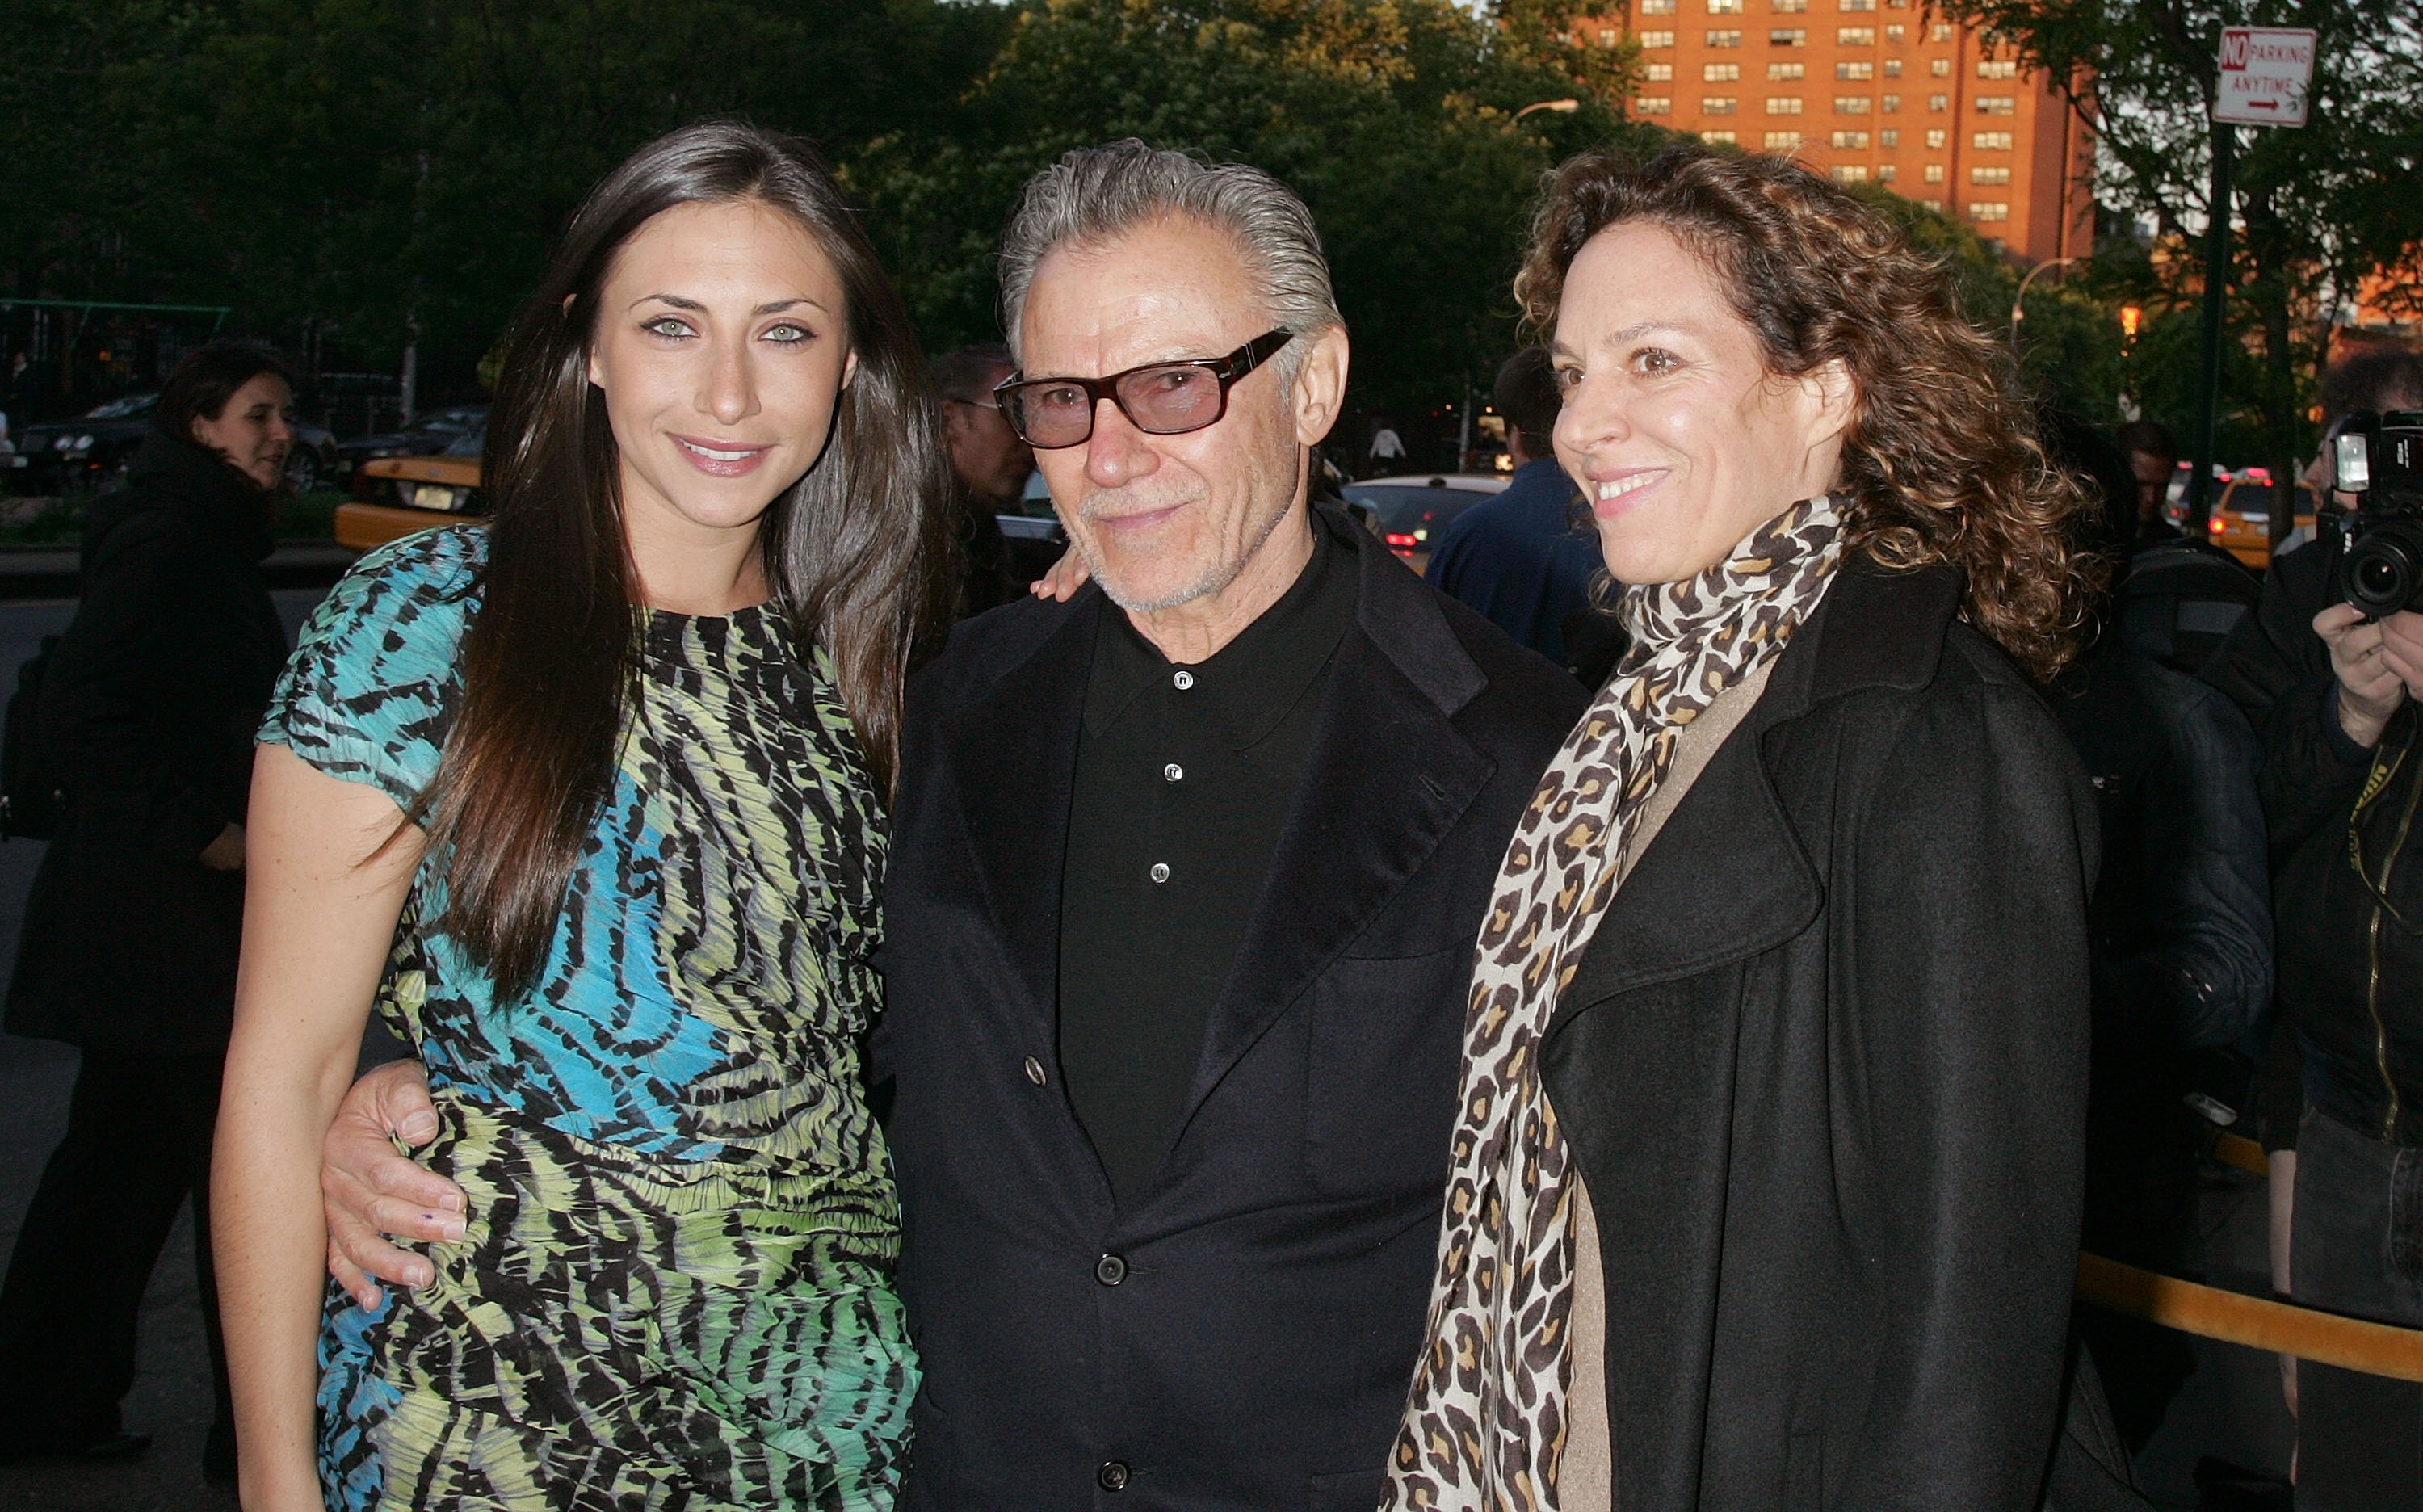 Harvey Keitel with daughter Stella Keitel (L) and Daphna Kastner attend the Holy Rollers premiere at Landmark's Sunshine Cinema on May 10, 2010 in New York City. | Photo: Getty Images